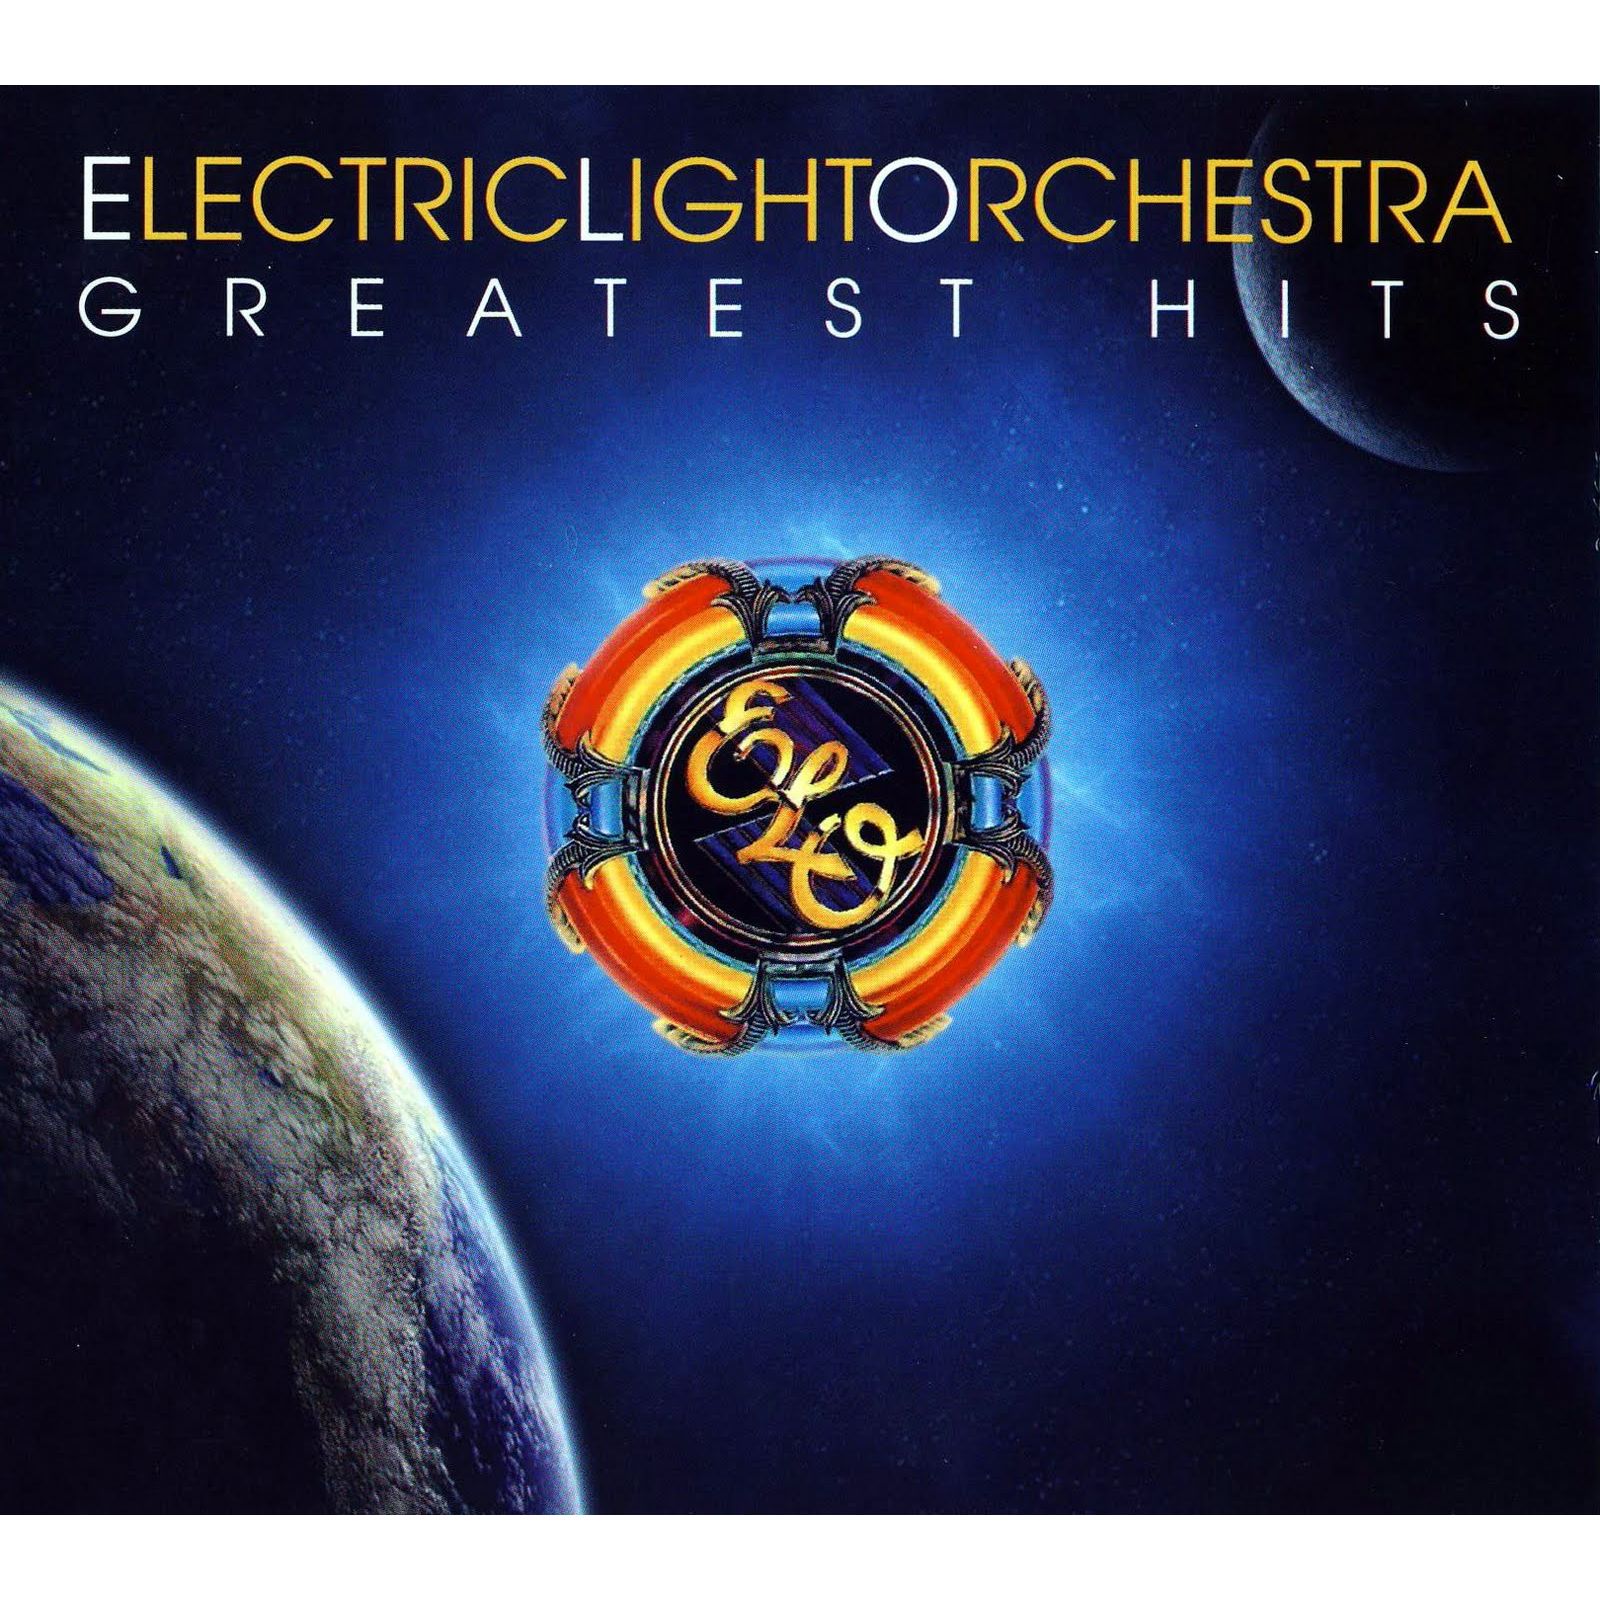 ELECTRIC LIGHT ORCHESTRA FREE Wallpapers Background images